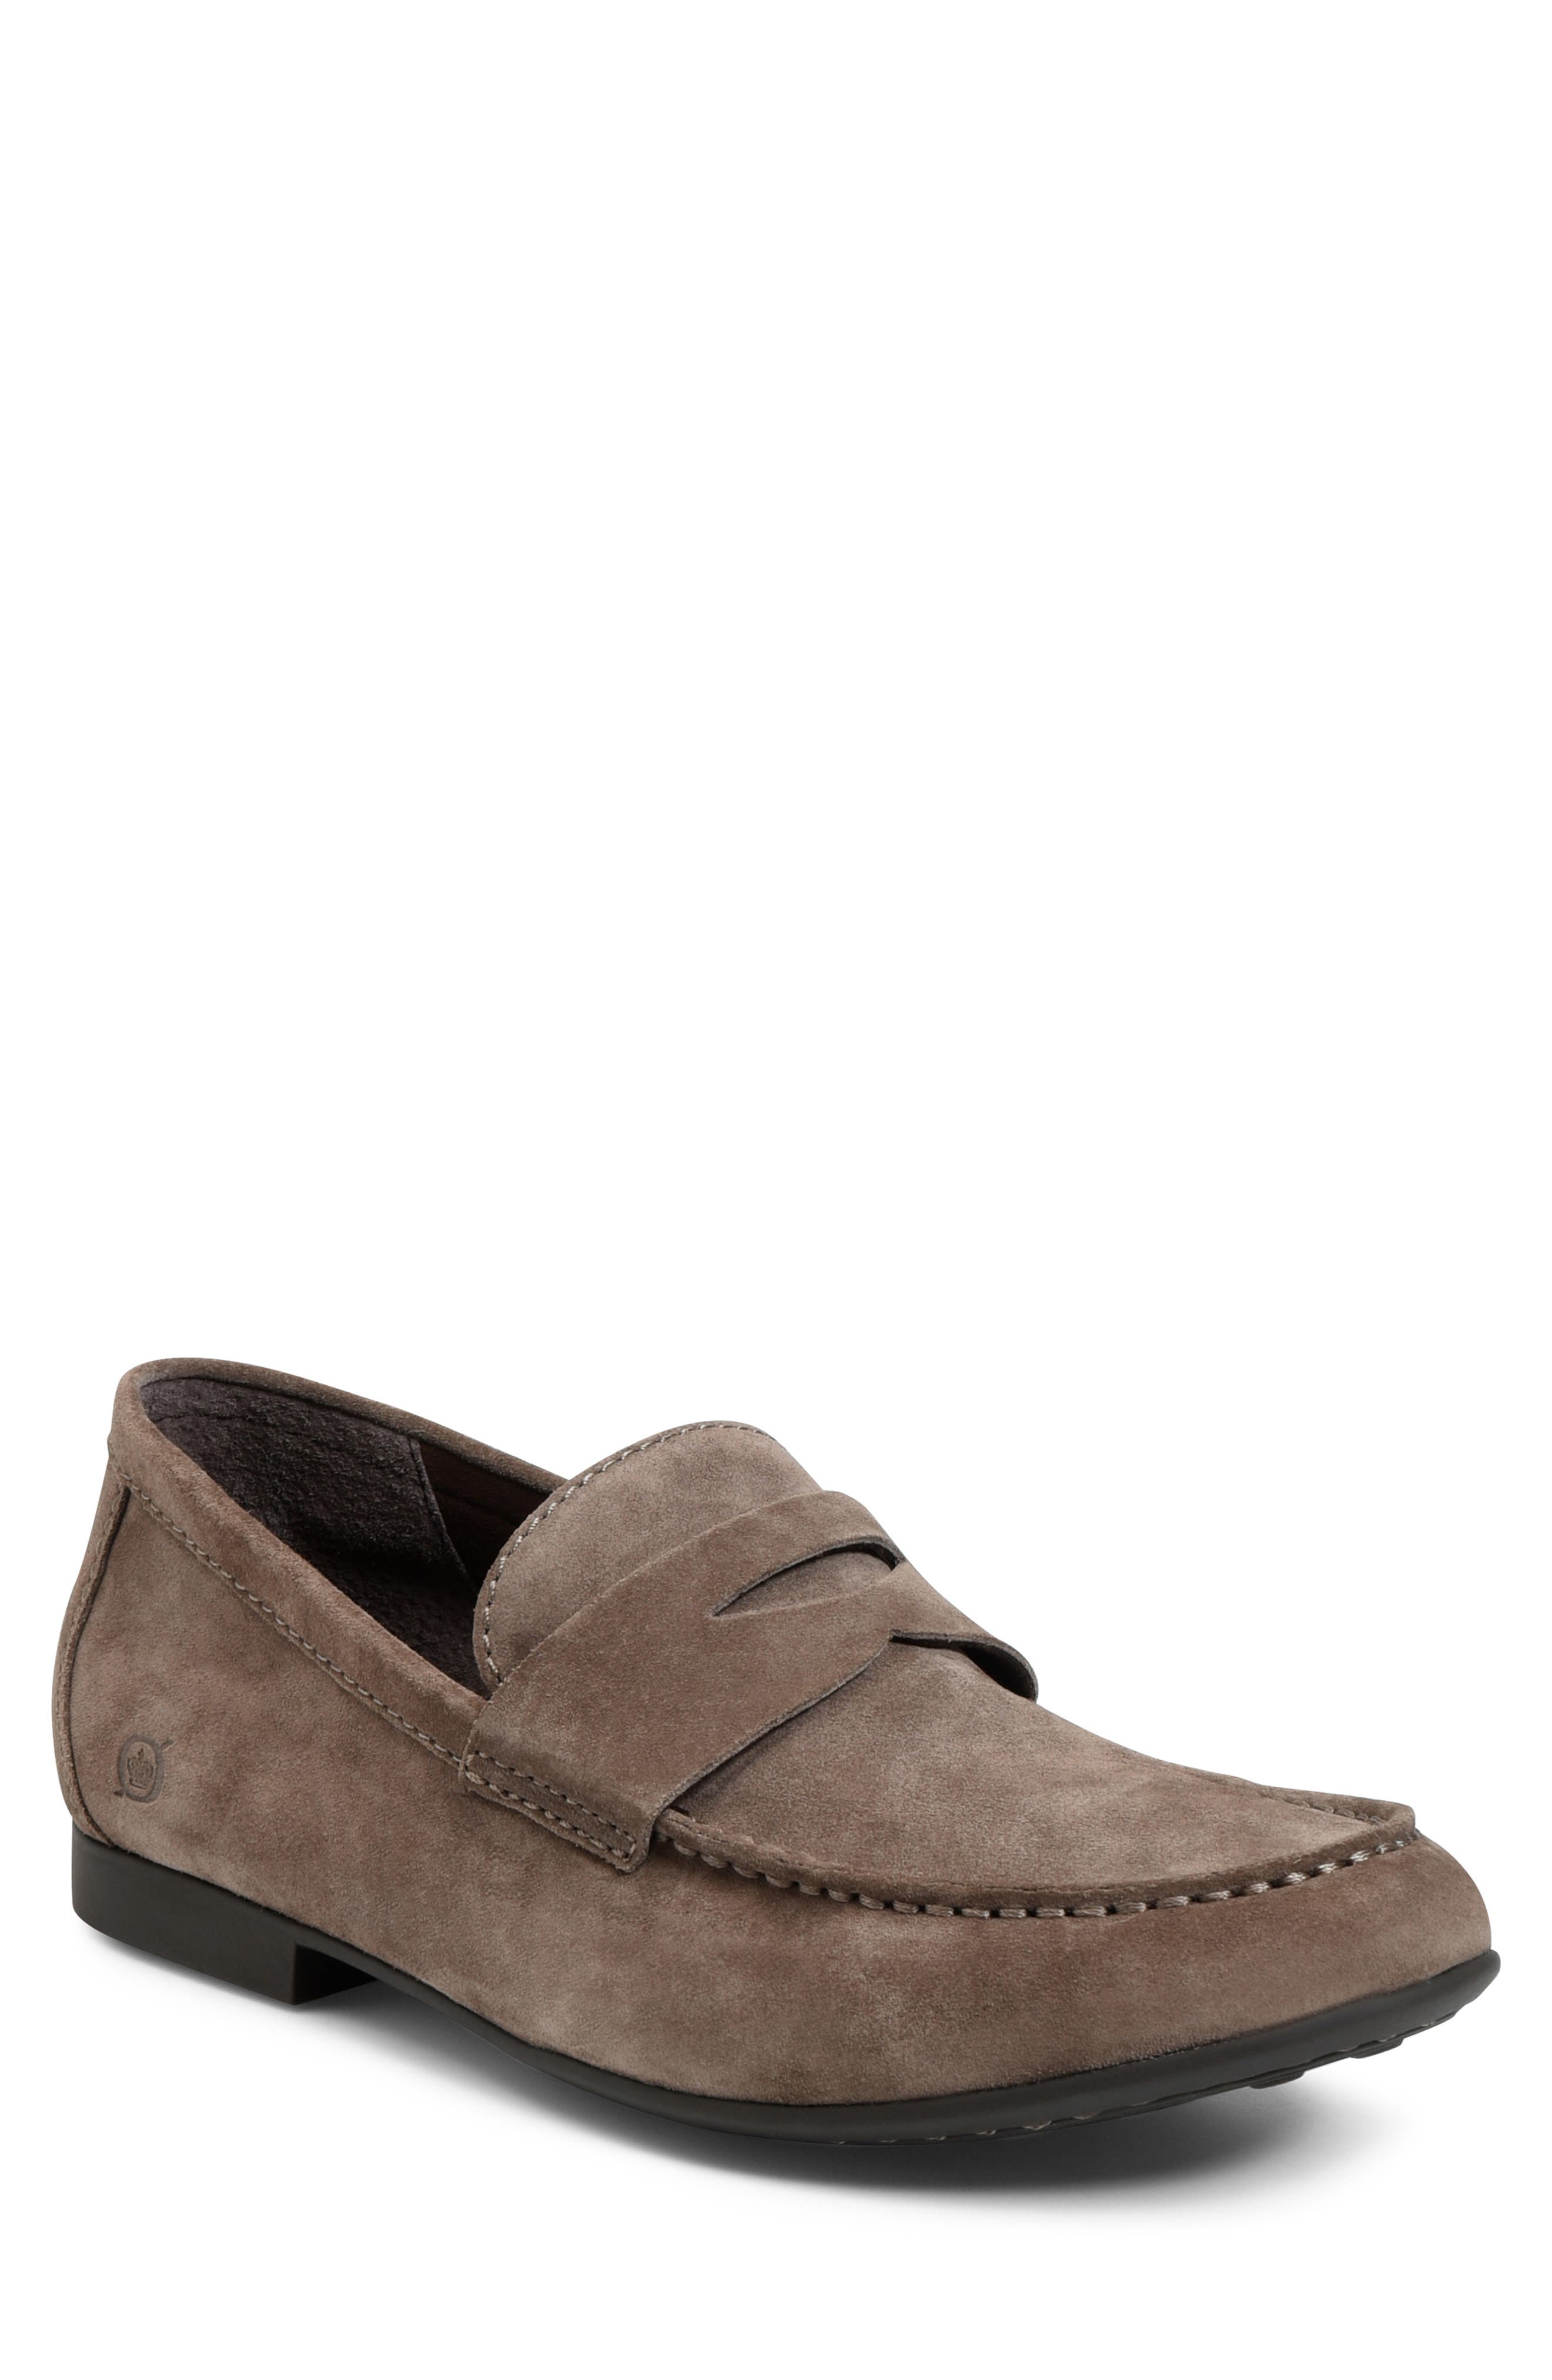 born mens loafers